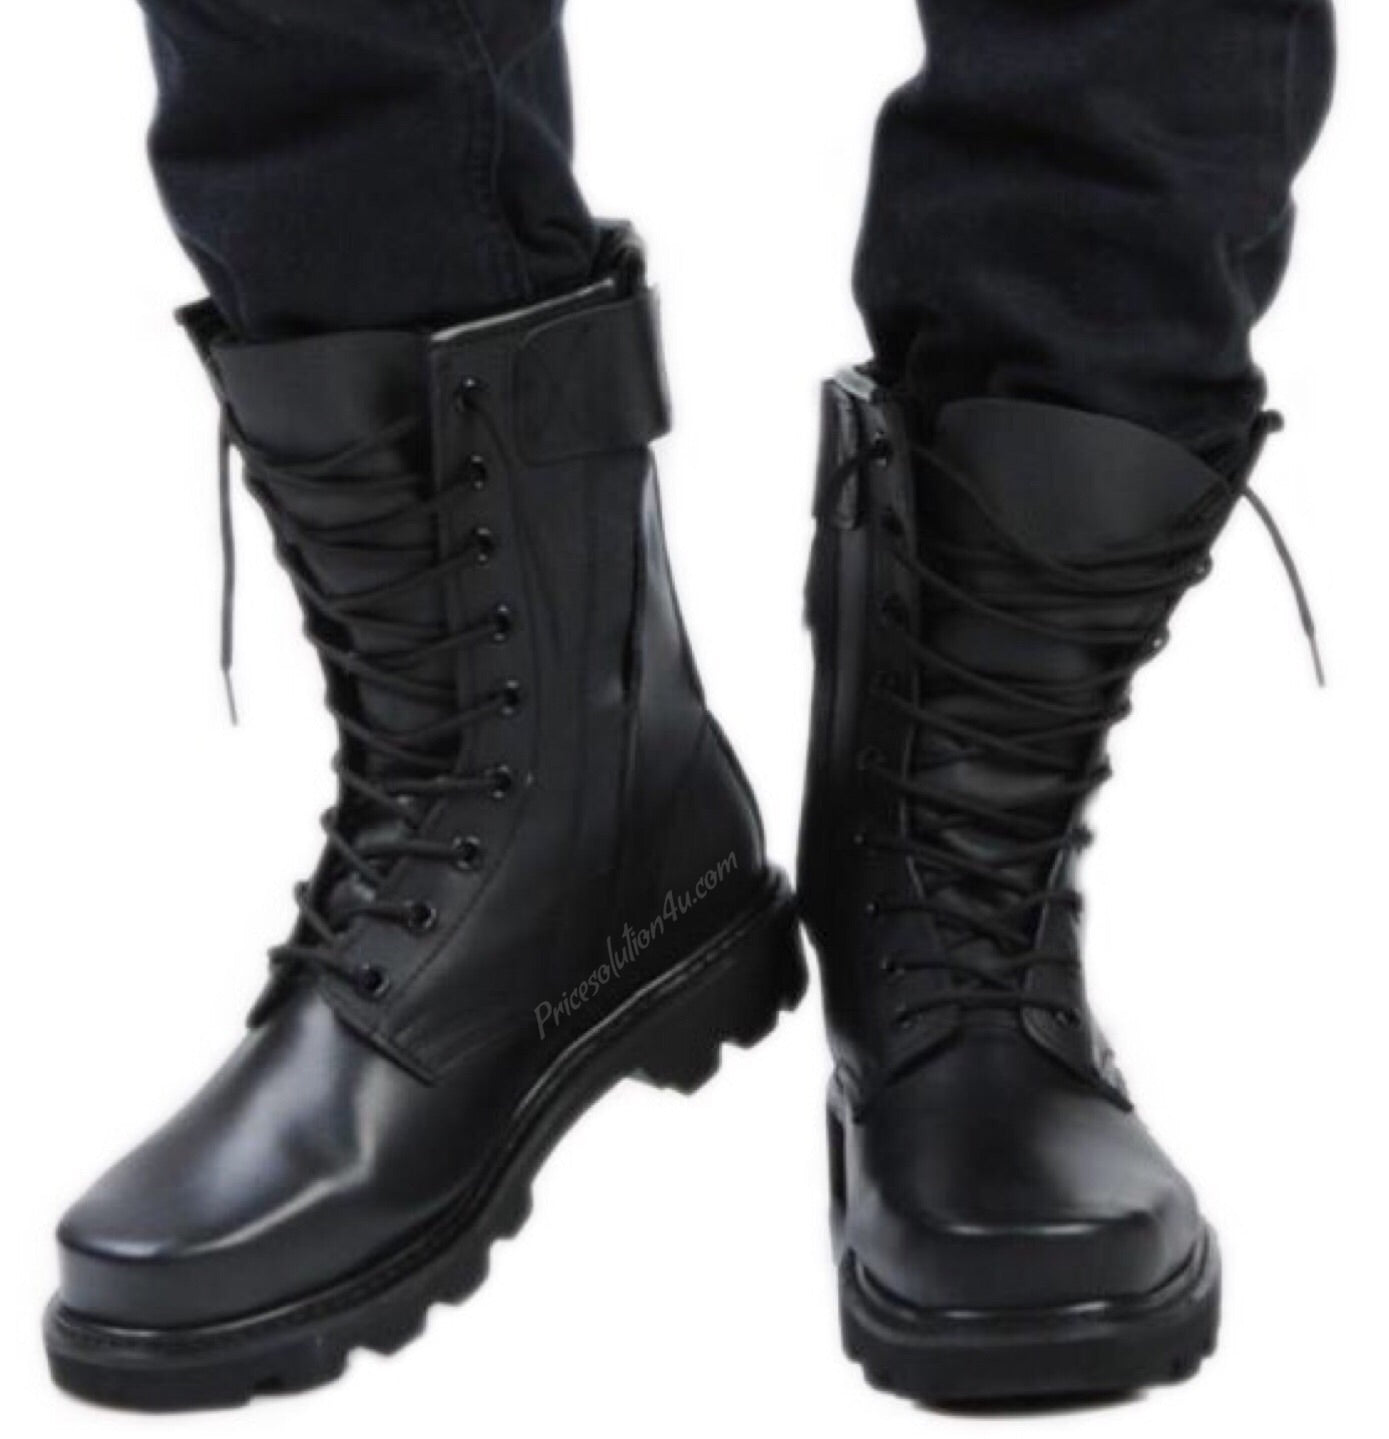 soft leather combat boots